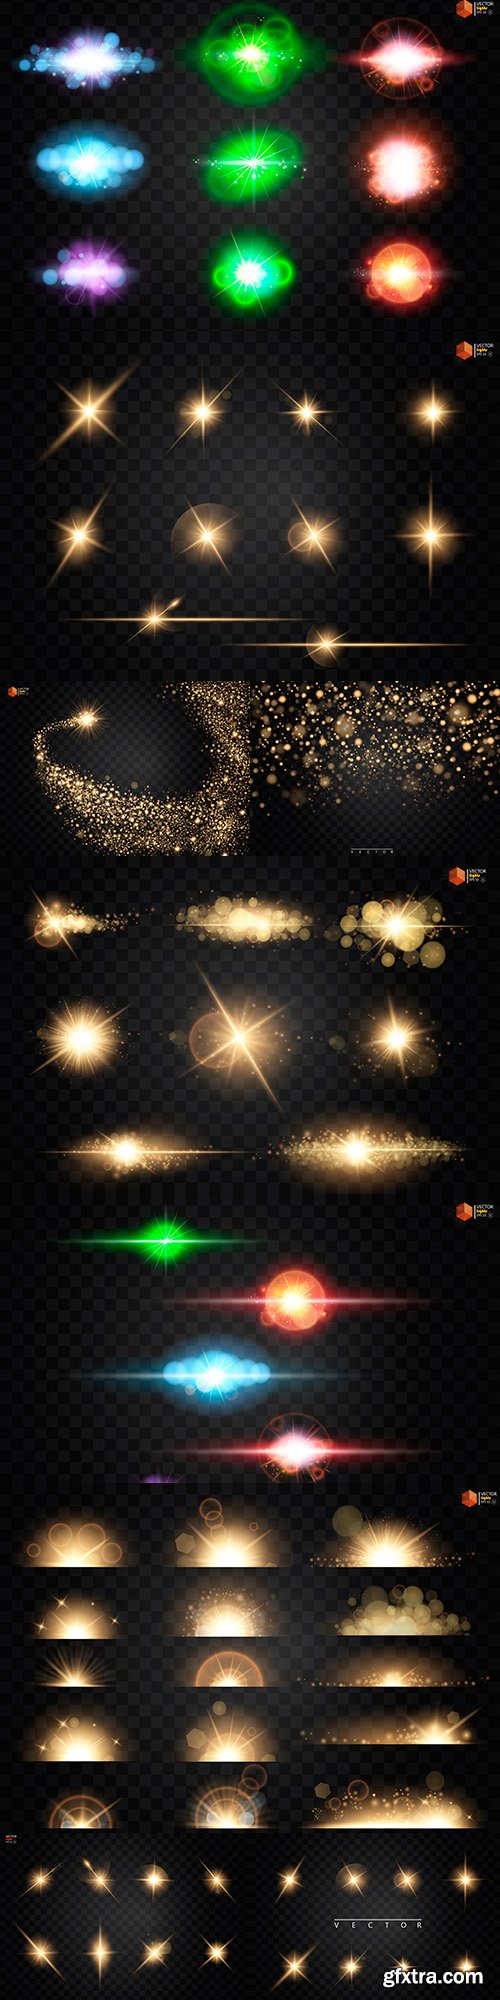 Bright lighting effects collection design illustrations 25